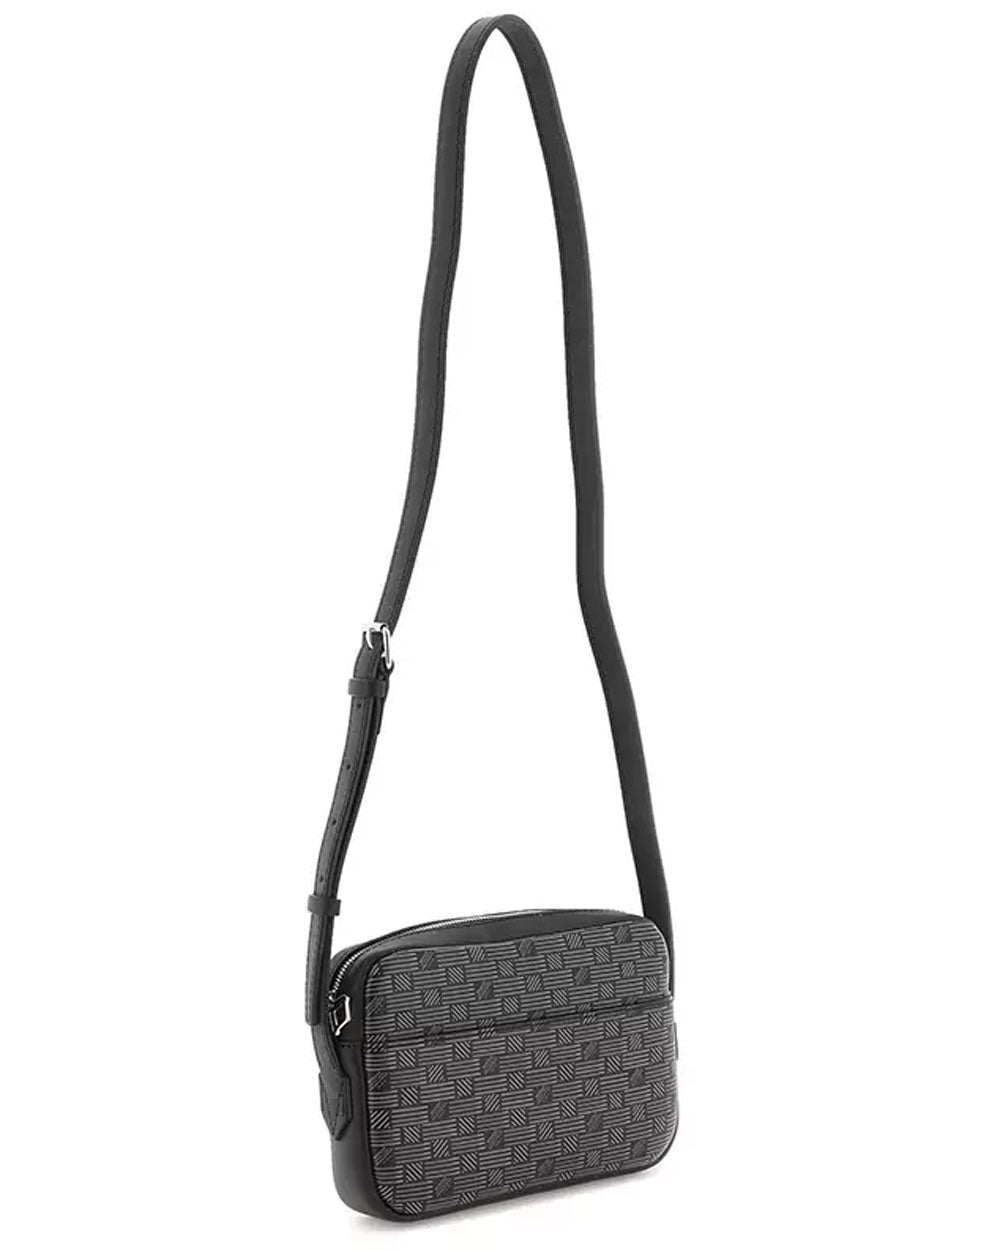 Savoie 24 Crossbody in Black and Blue